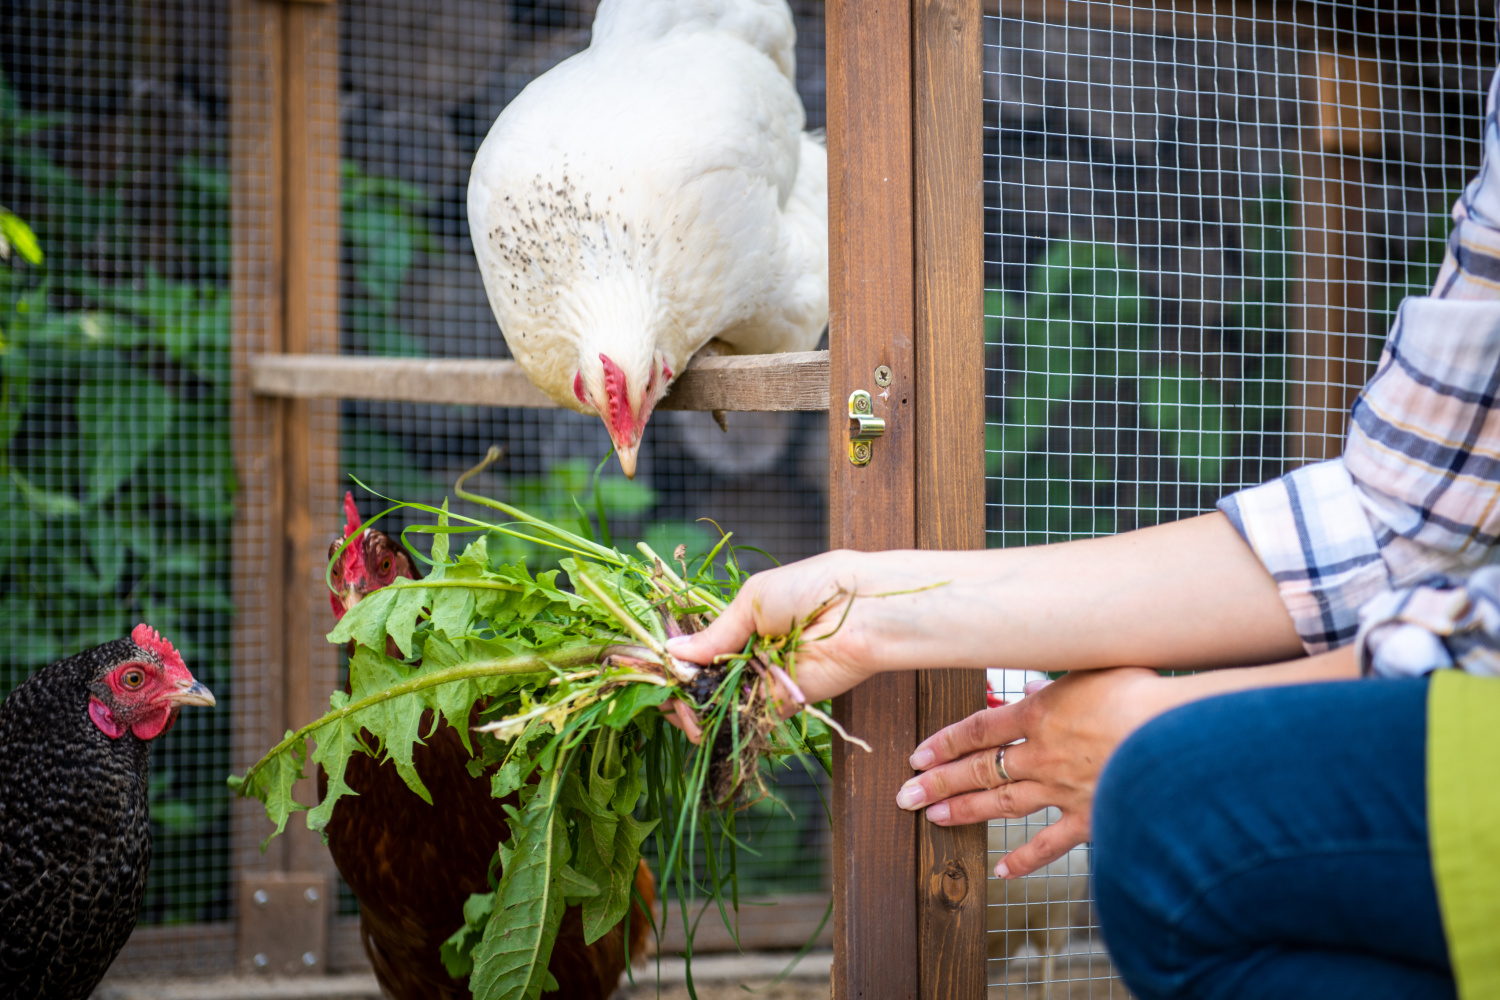 A trusted friend feeds a chicken for you so you can vacation with a farm